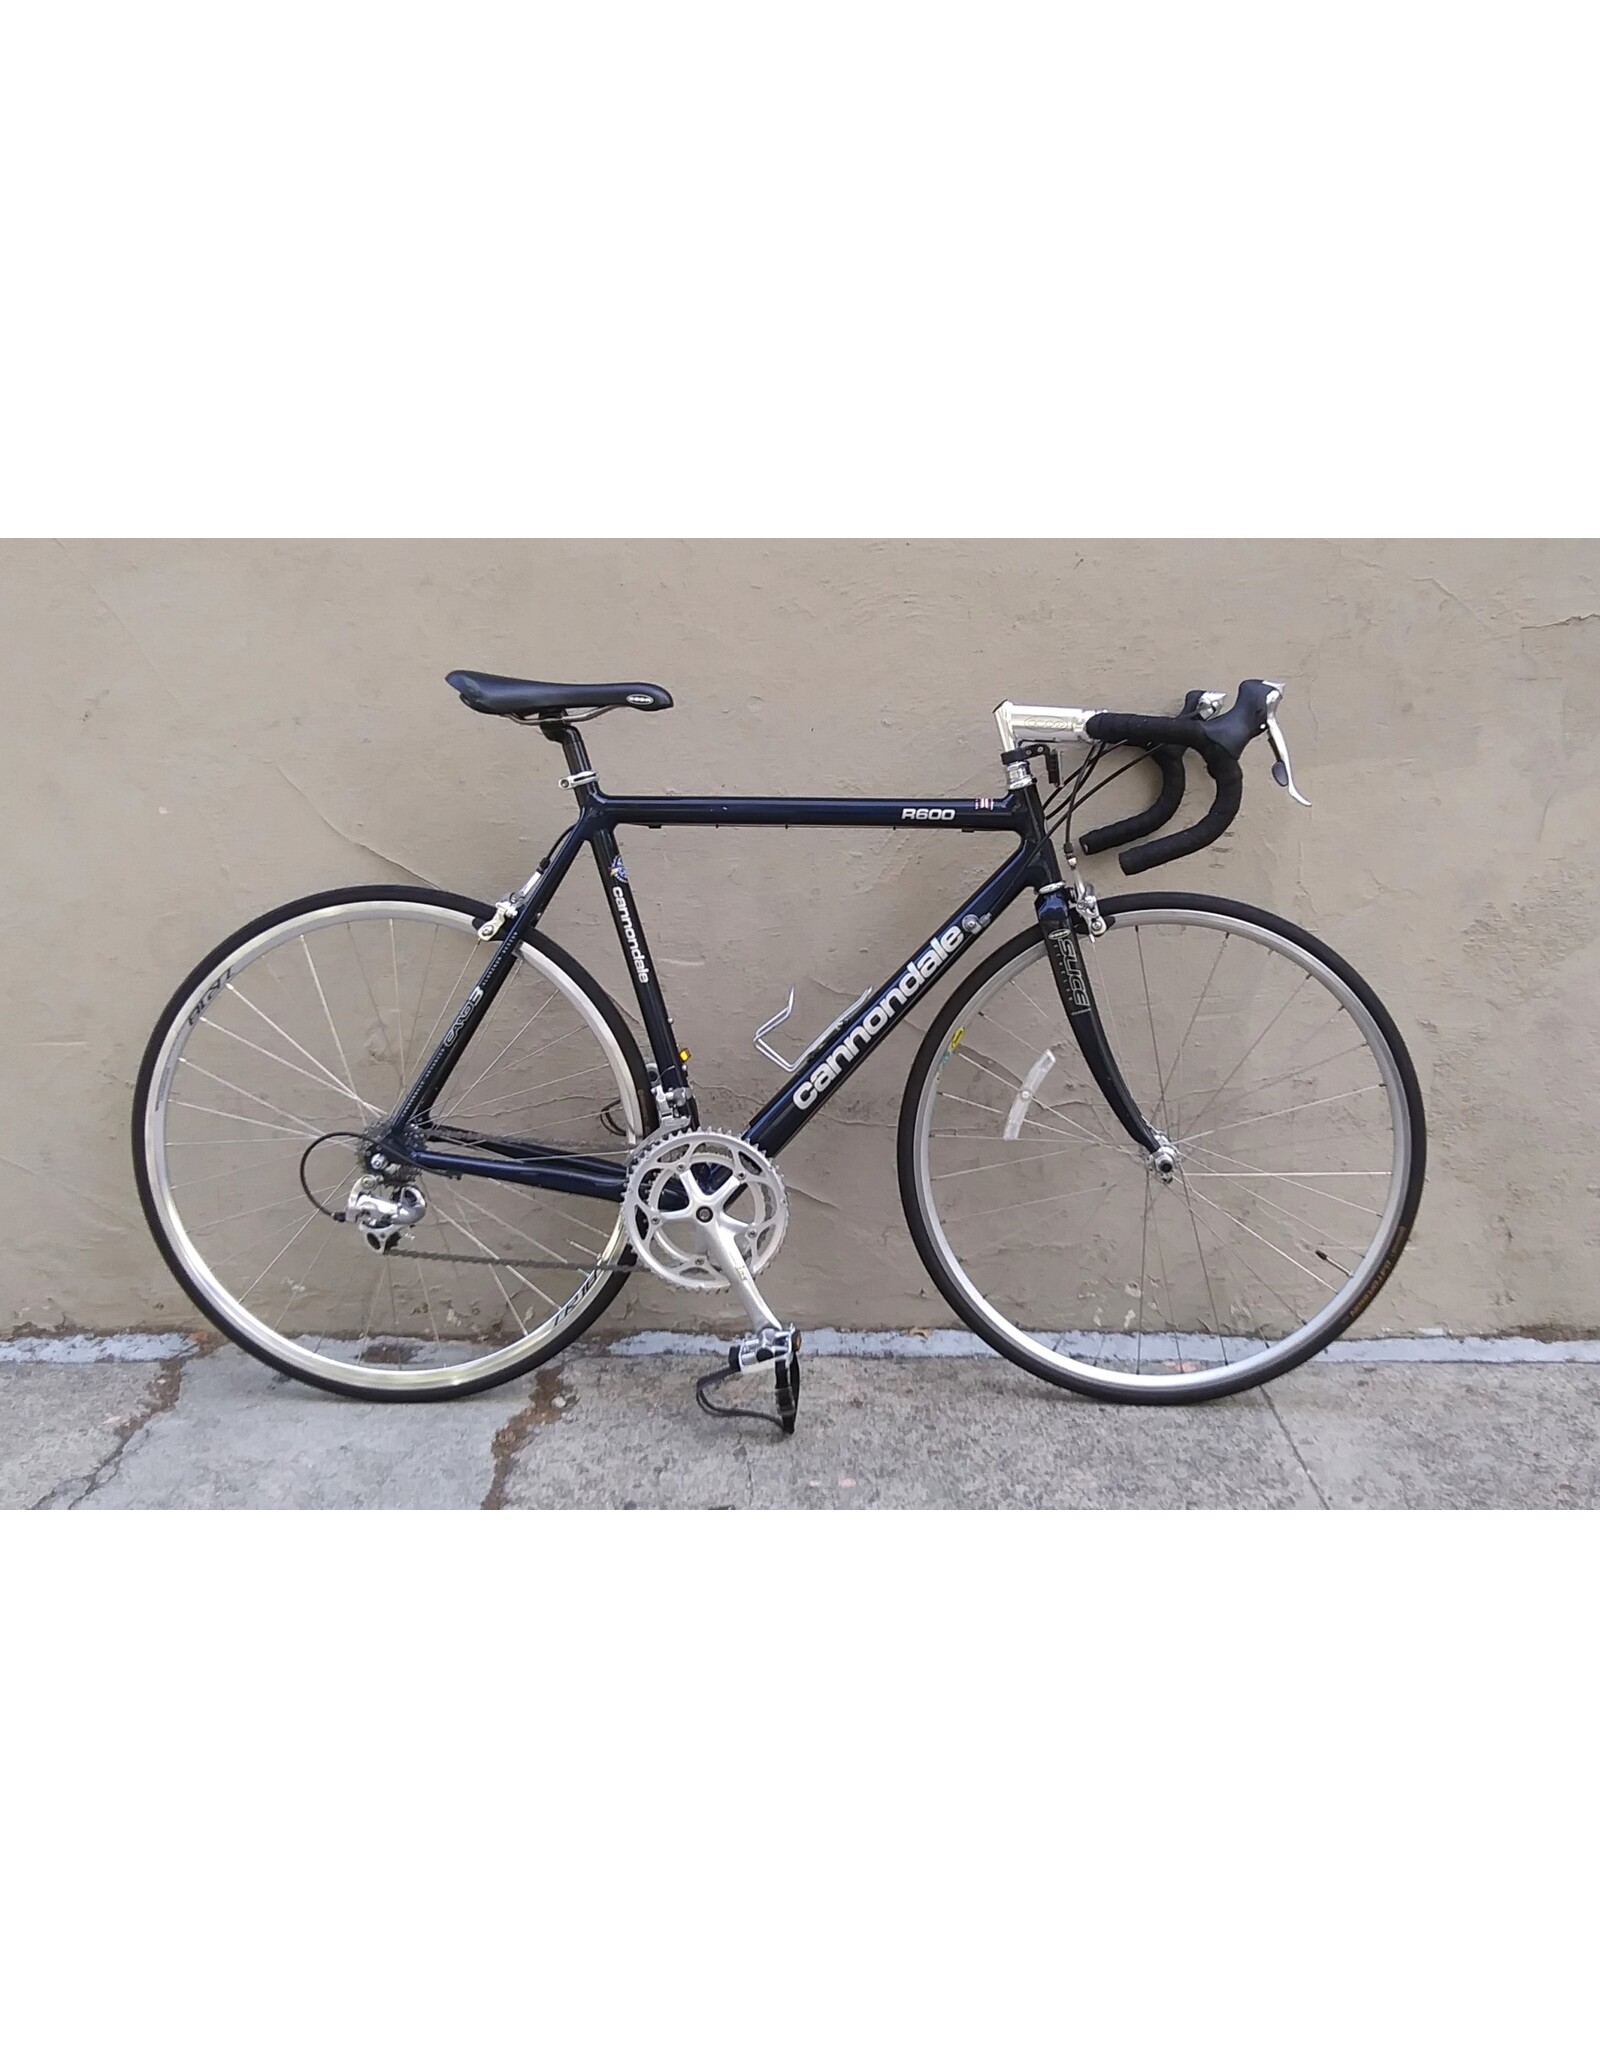 Cannondale Cannondale  R600 CAAD 3,  21 Inches, Blue